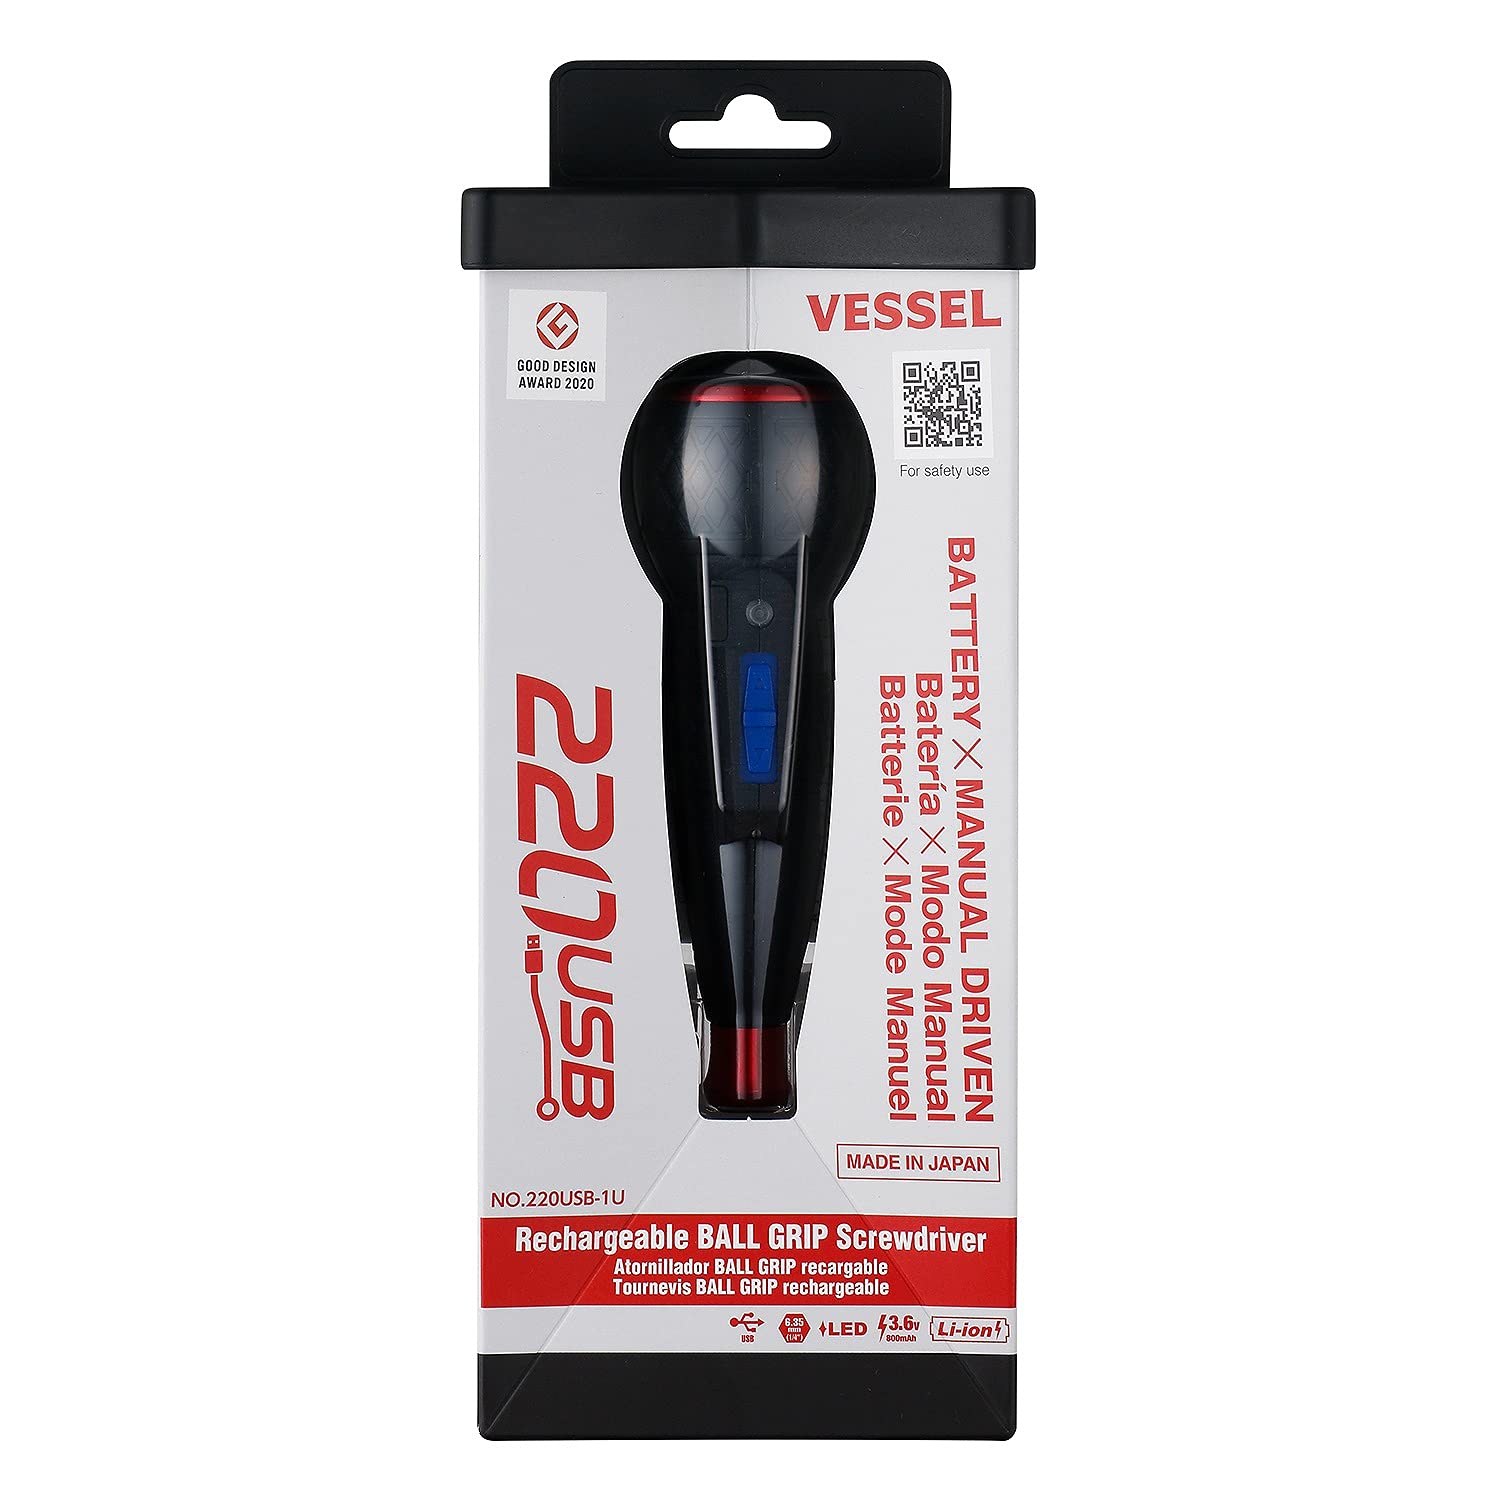 VESSEL BALL GRIP Rechargeable Screwdriver Cordless No.220USB-1U 220USB1U Made in Japan by VESSEL - Tool Guy Republic